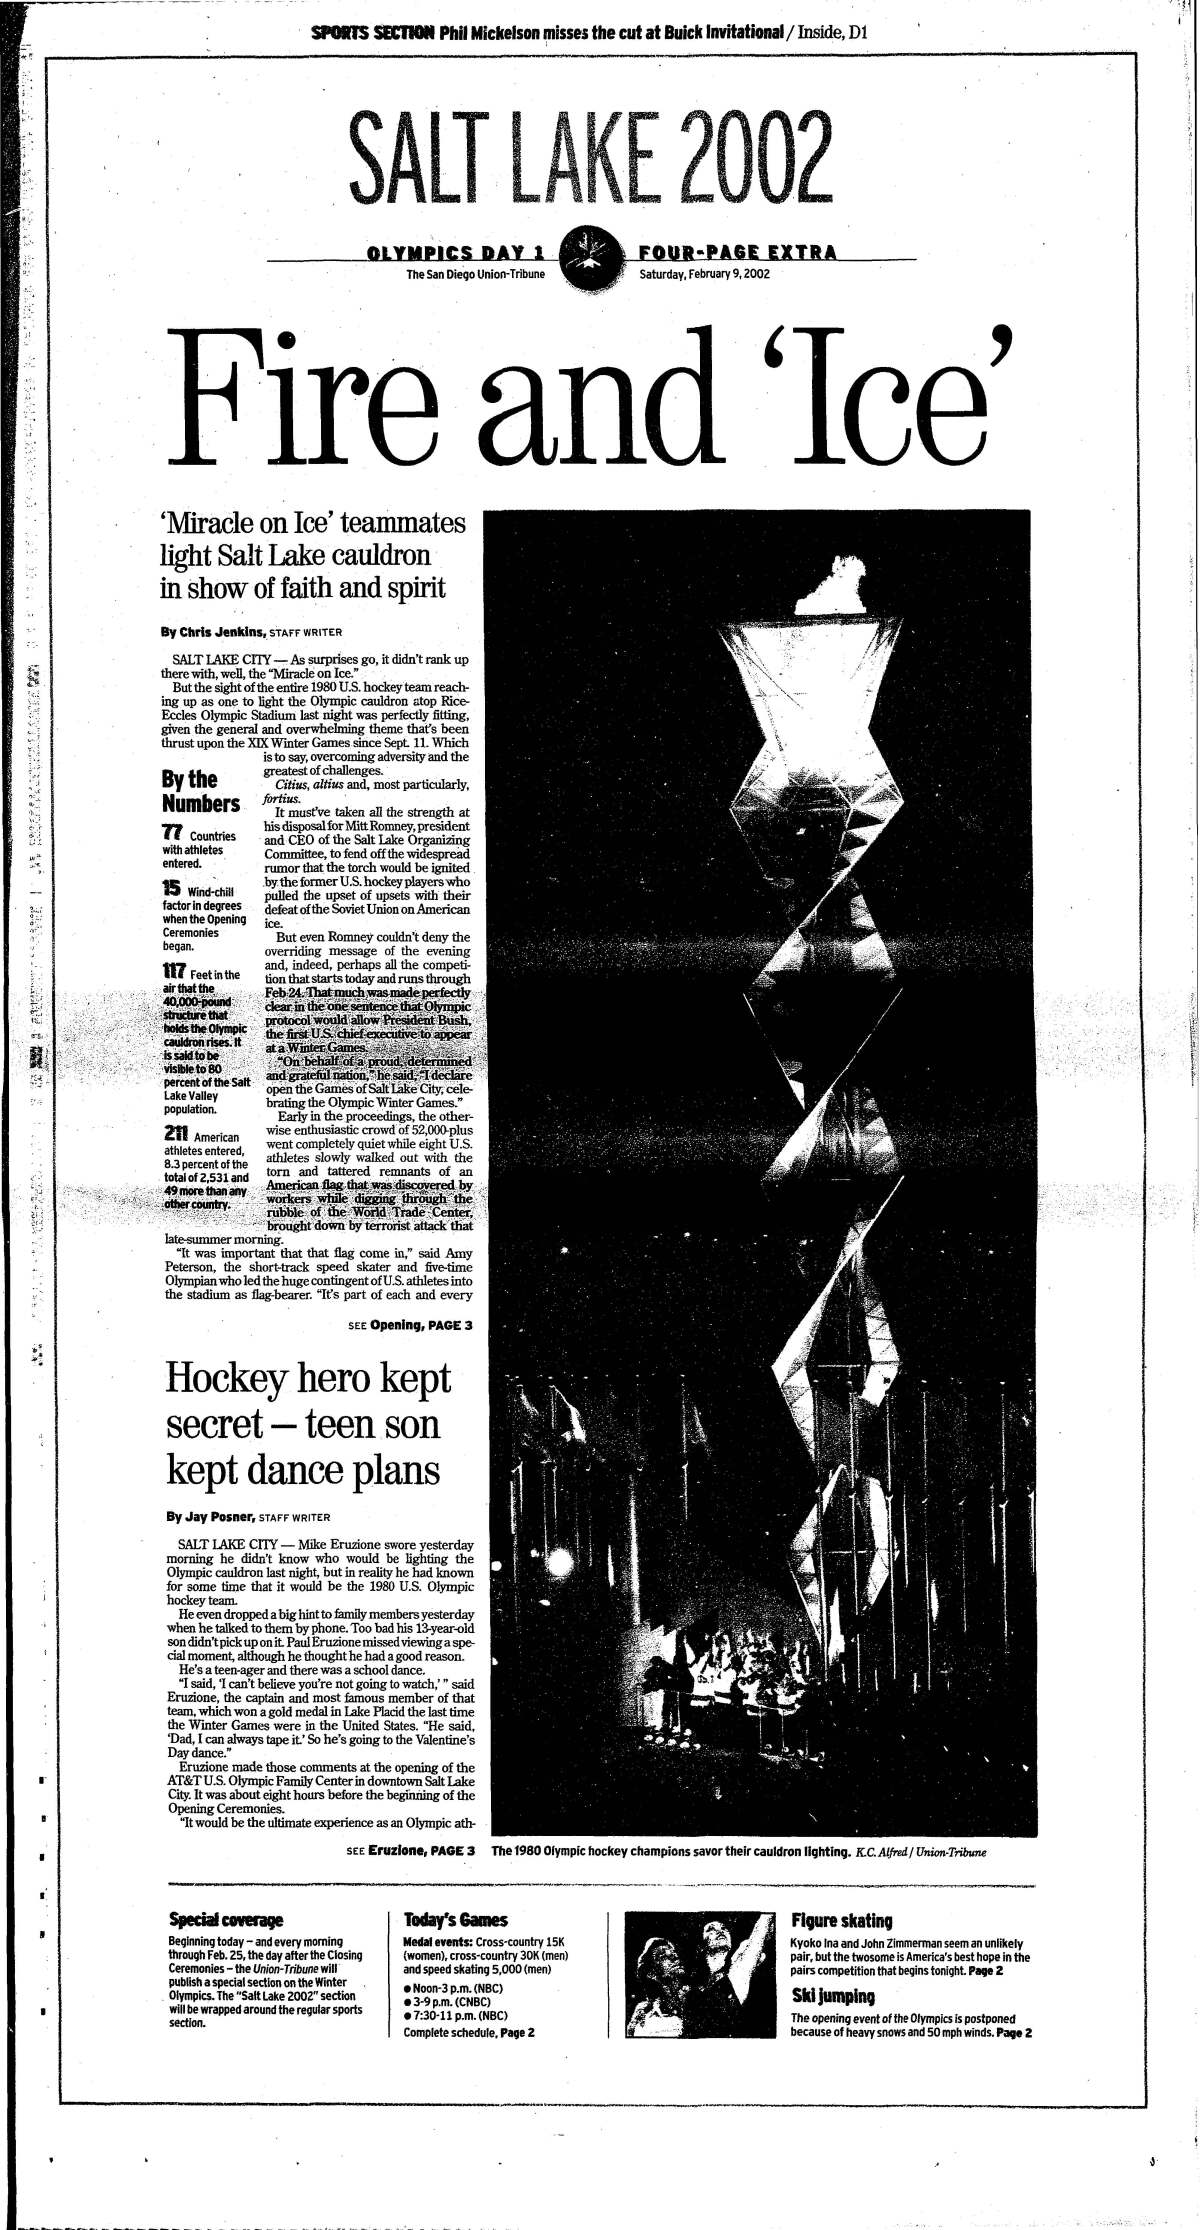 A photo of the Olympic Torch lighting ceremony dominated the front page of the Union-Tribune special section